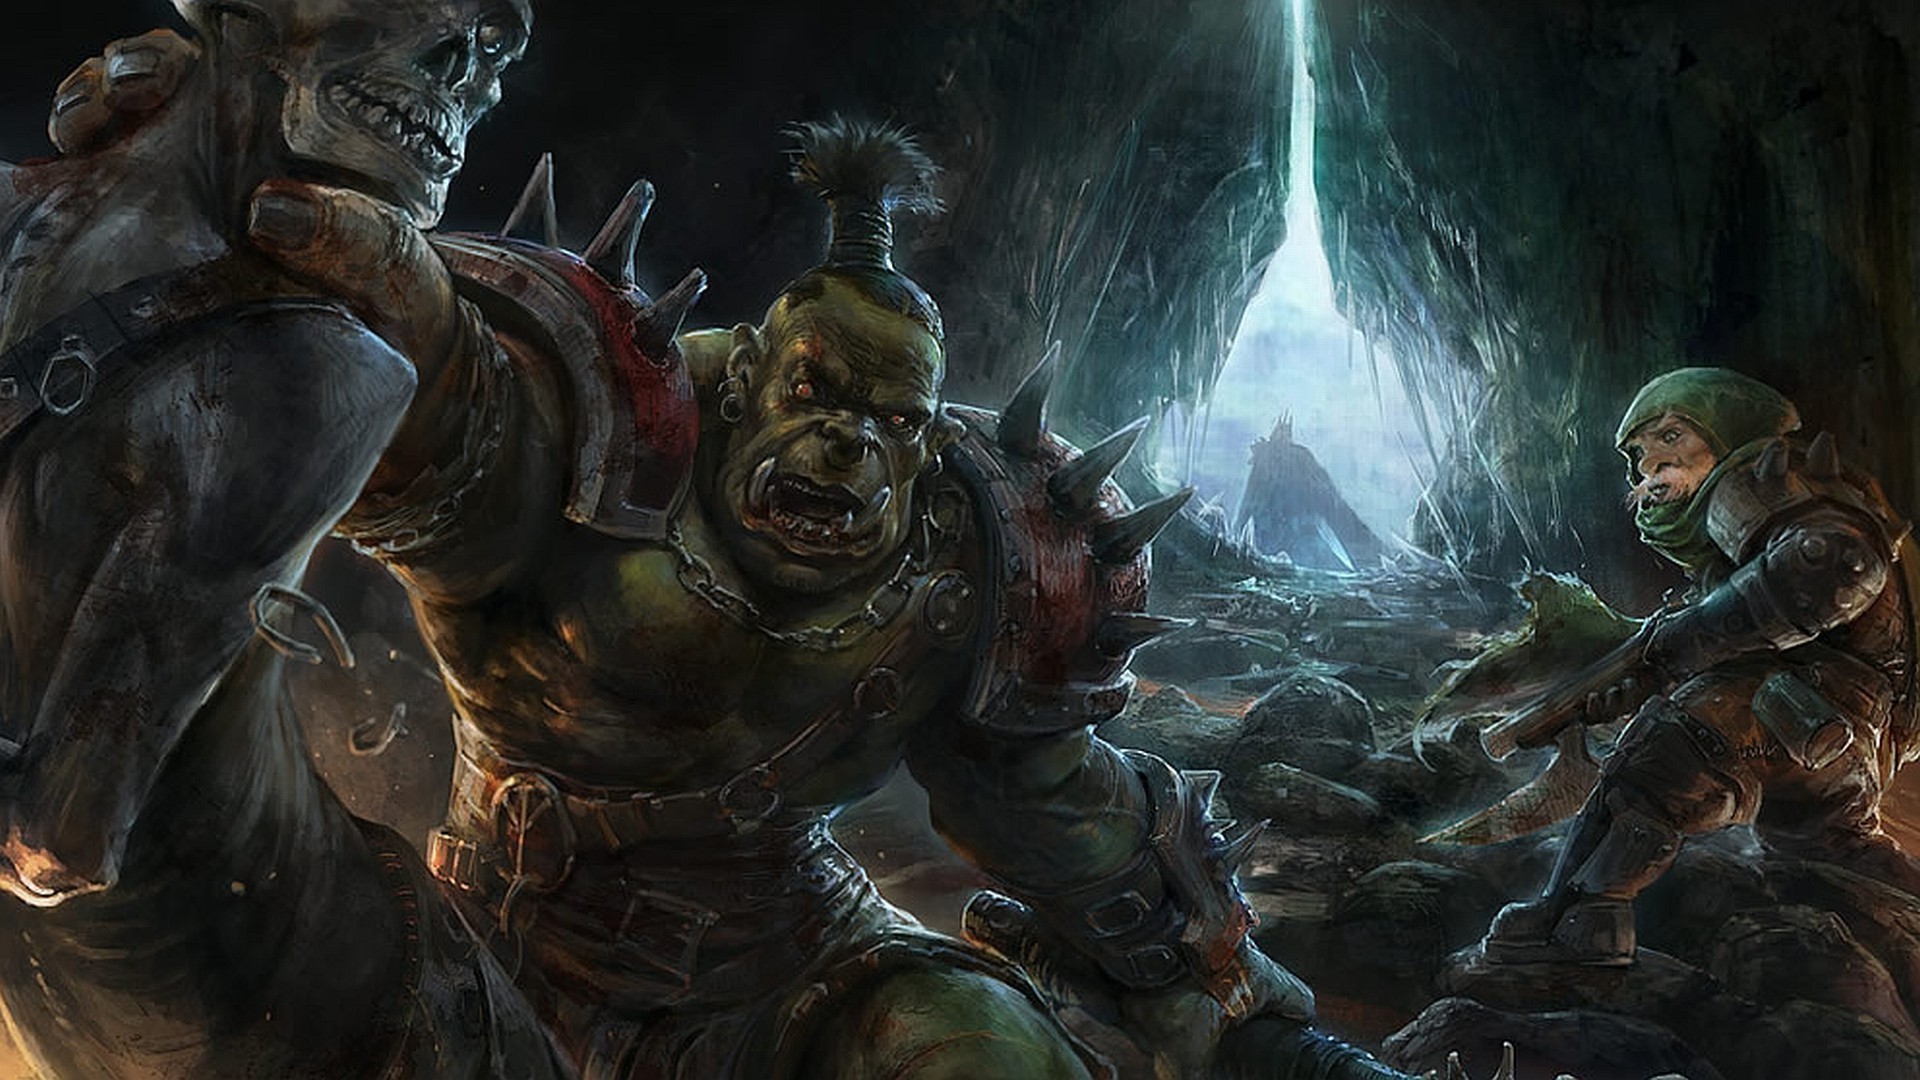 1920x1080 Fighting off the orcs wallpaper - 1055902